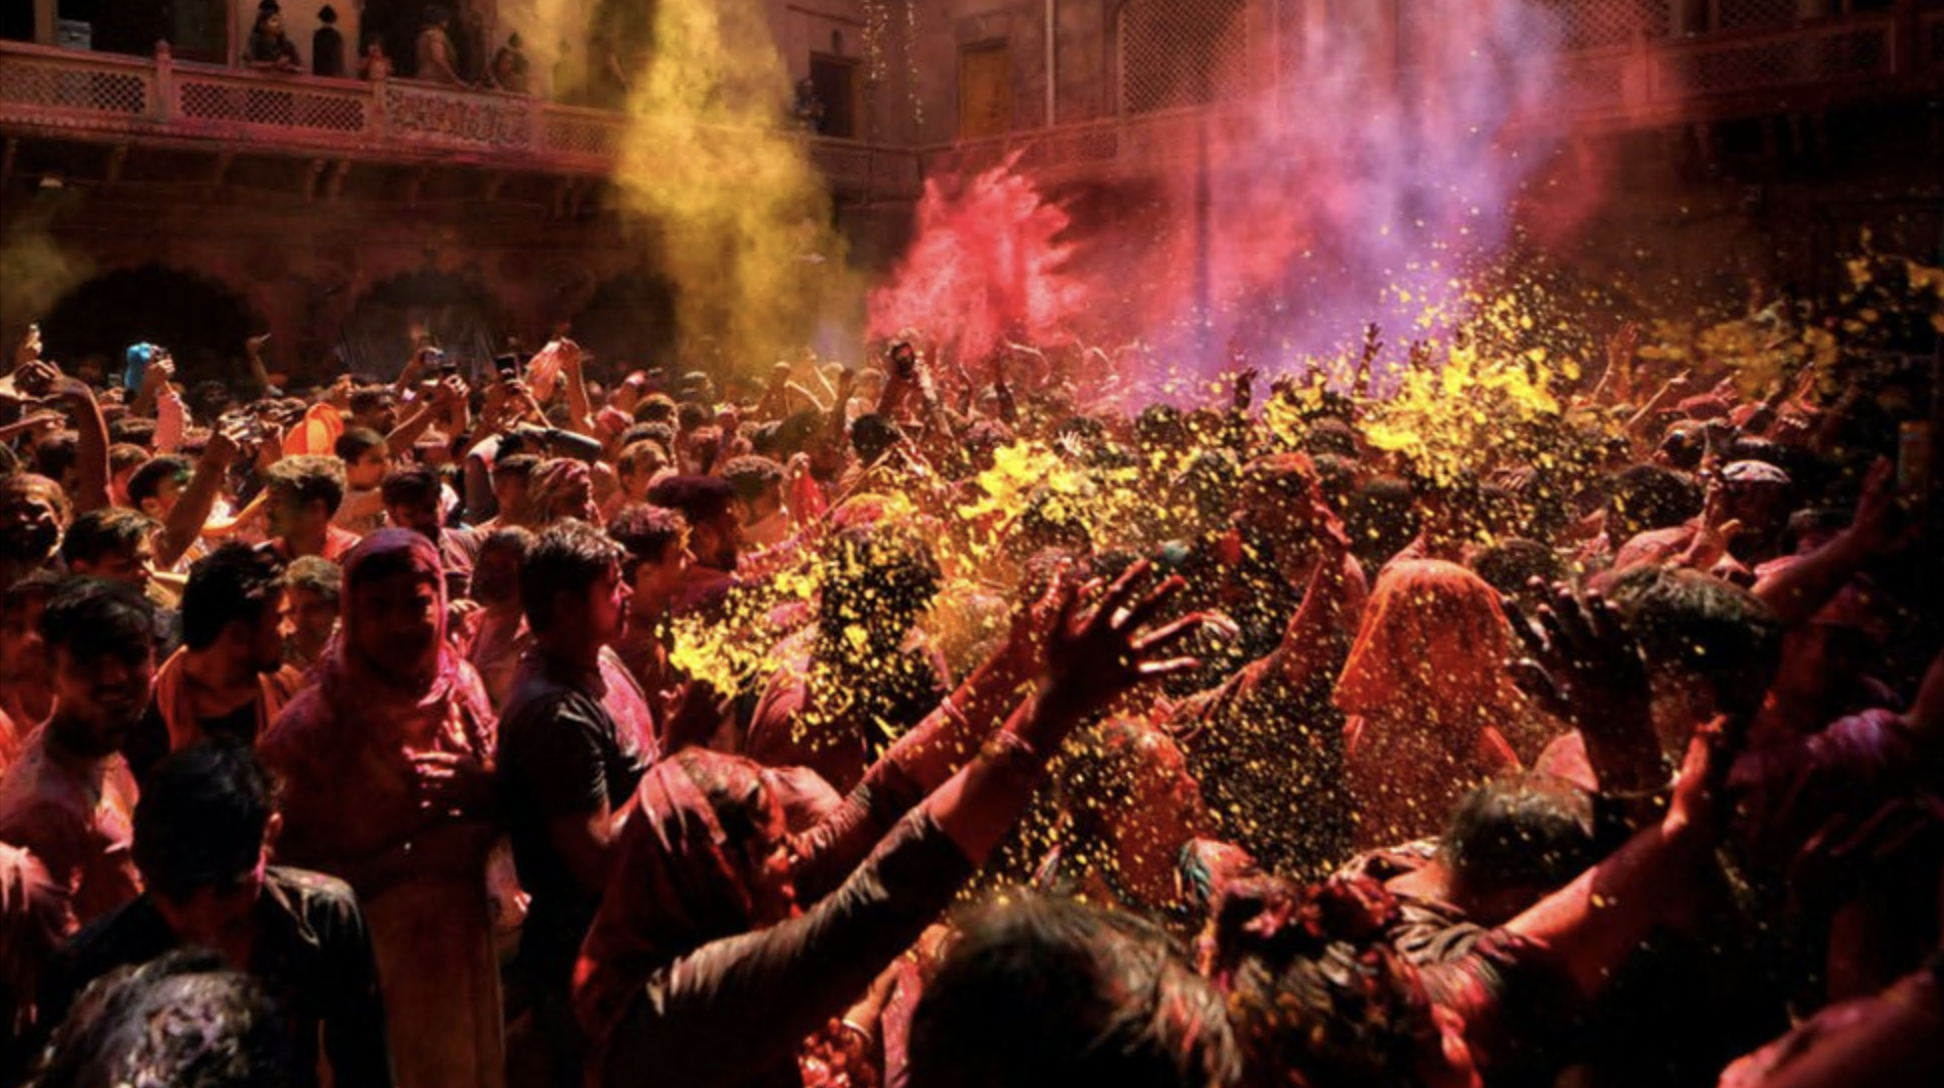  Hindu devotees pray at Radha Ballav Temple during the holi festival with colourful powders